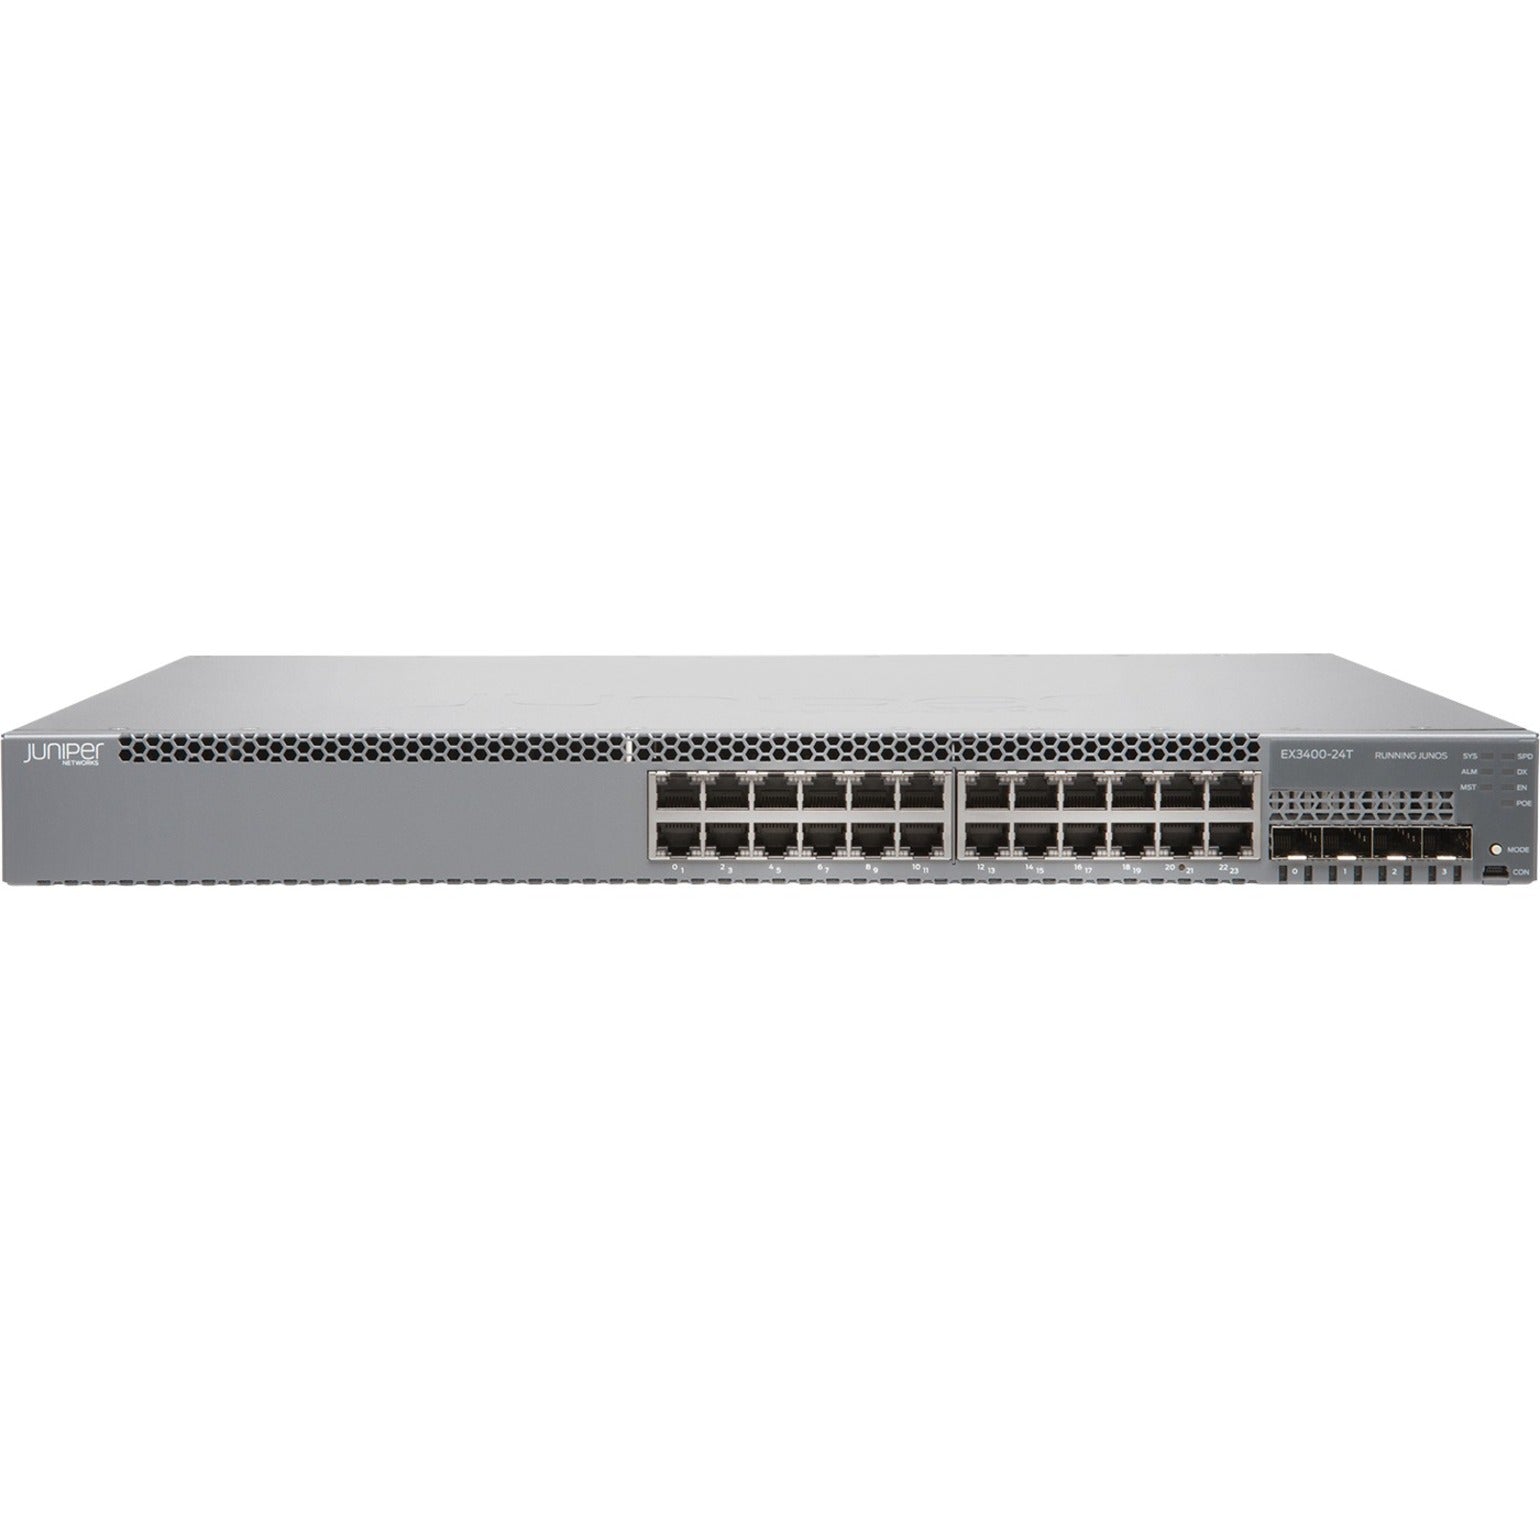 Juniper EX3400-24T-DC Layer 3 Switch, Gigabit Ethernet Network, 24 Ports, Power Supply Supported